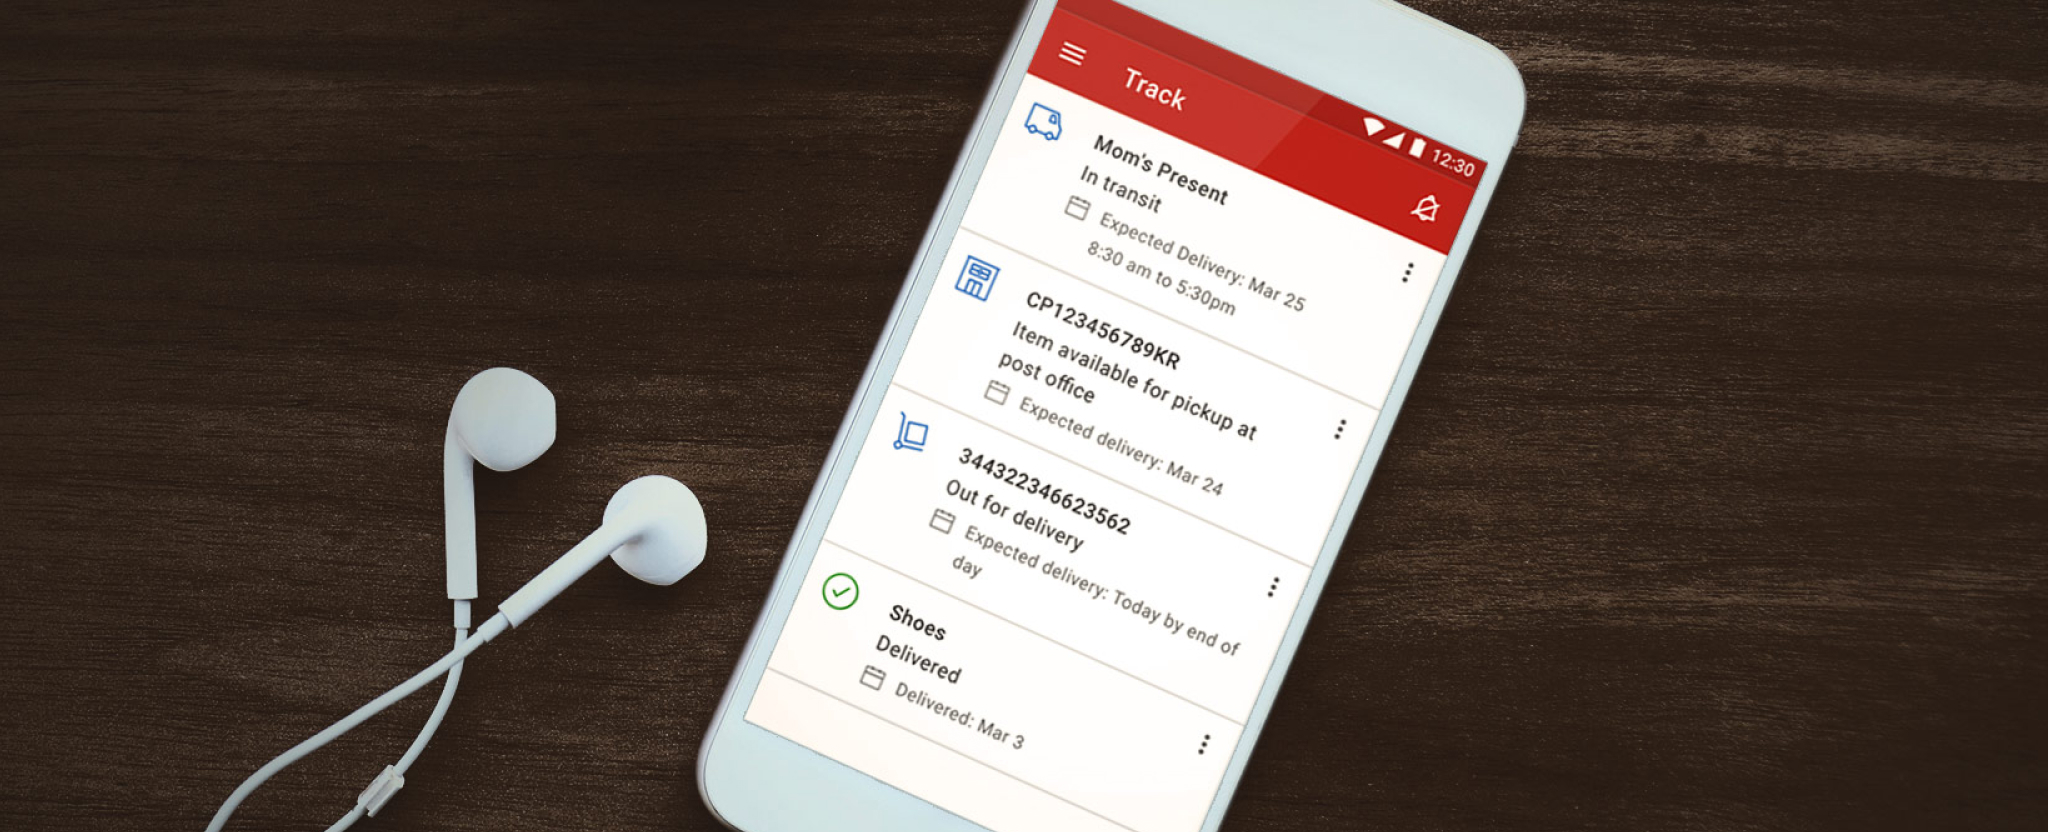 A cellphone is used to track multiple shipments in the Canada Post app. Earbuds rest beside the phone.